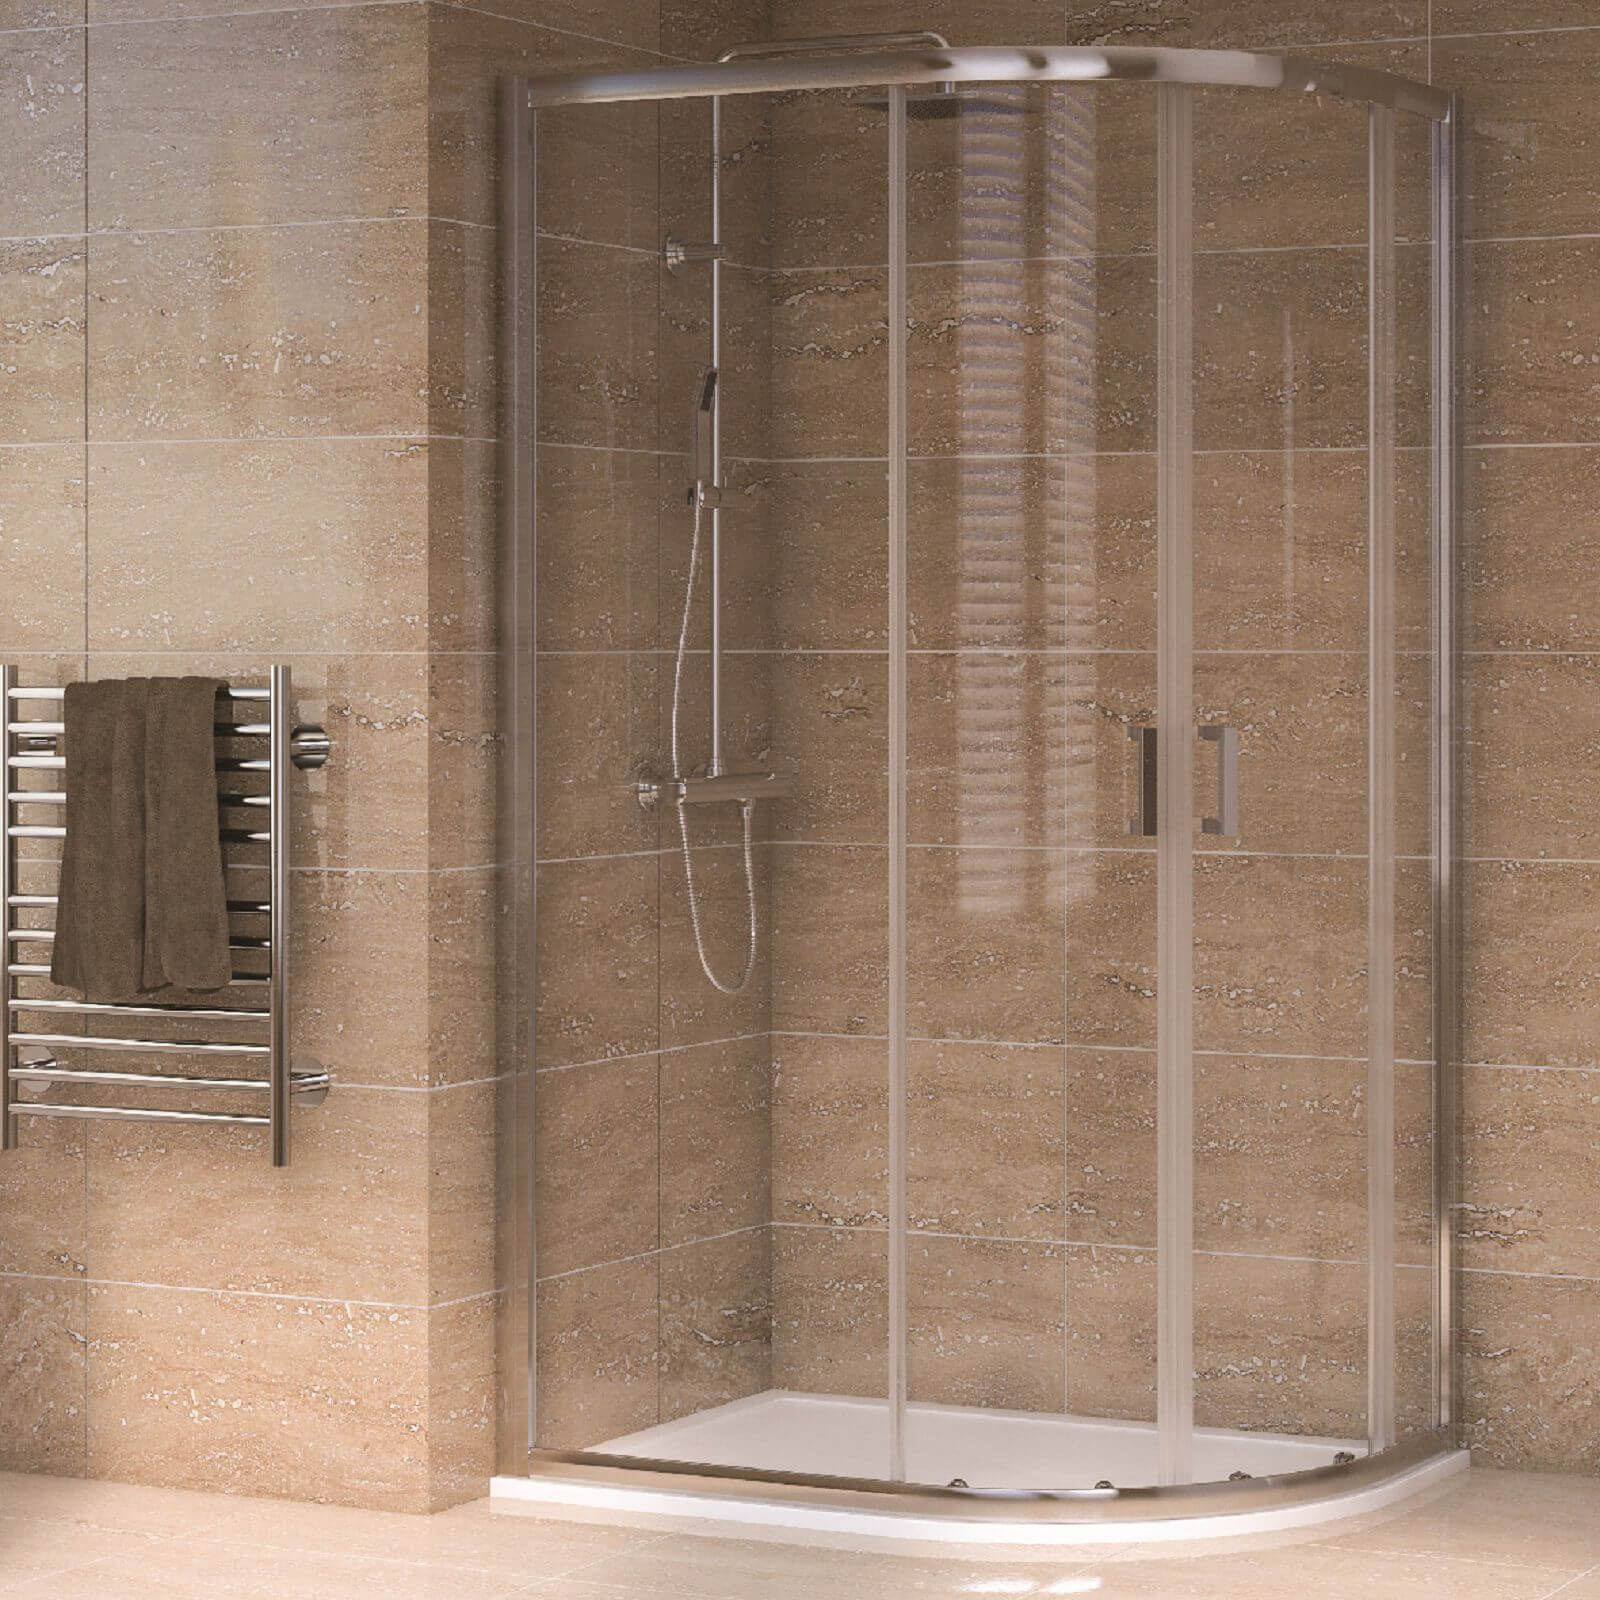 Photo of Aqualux Offset Quadrant 1000 X 800mm Right Hand Shower Enclosure And Tray Package